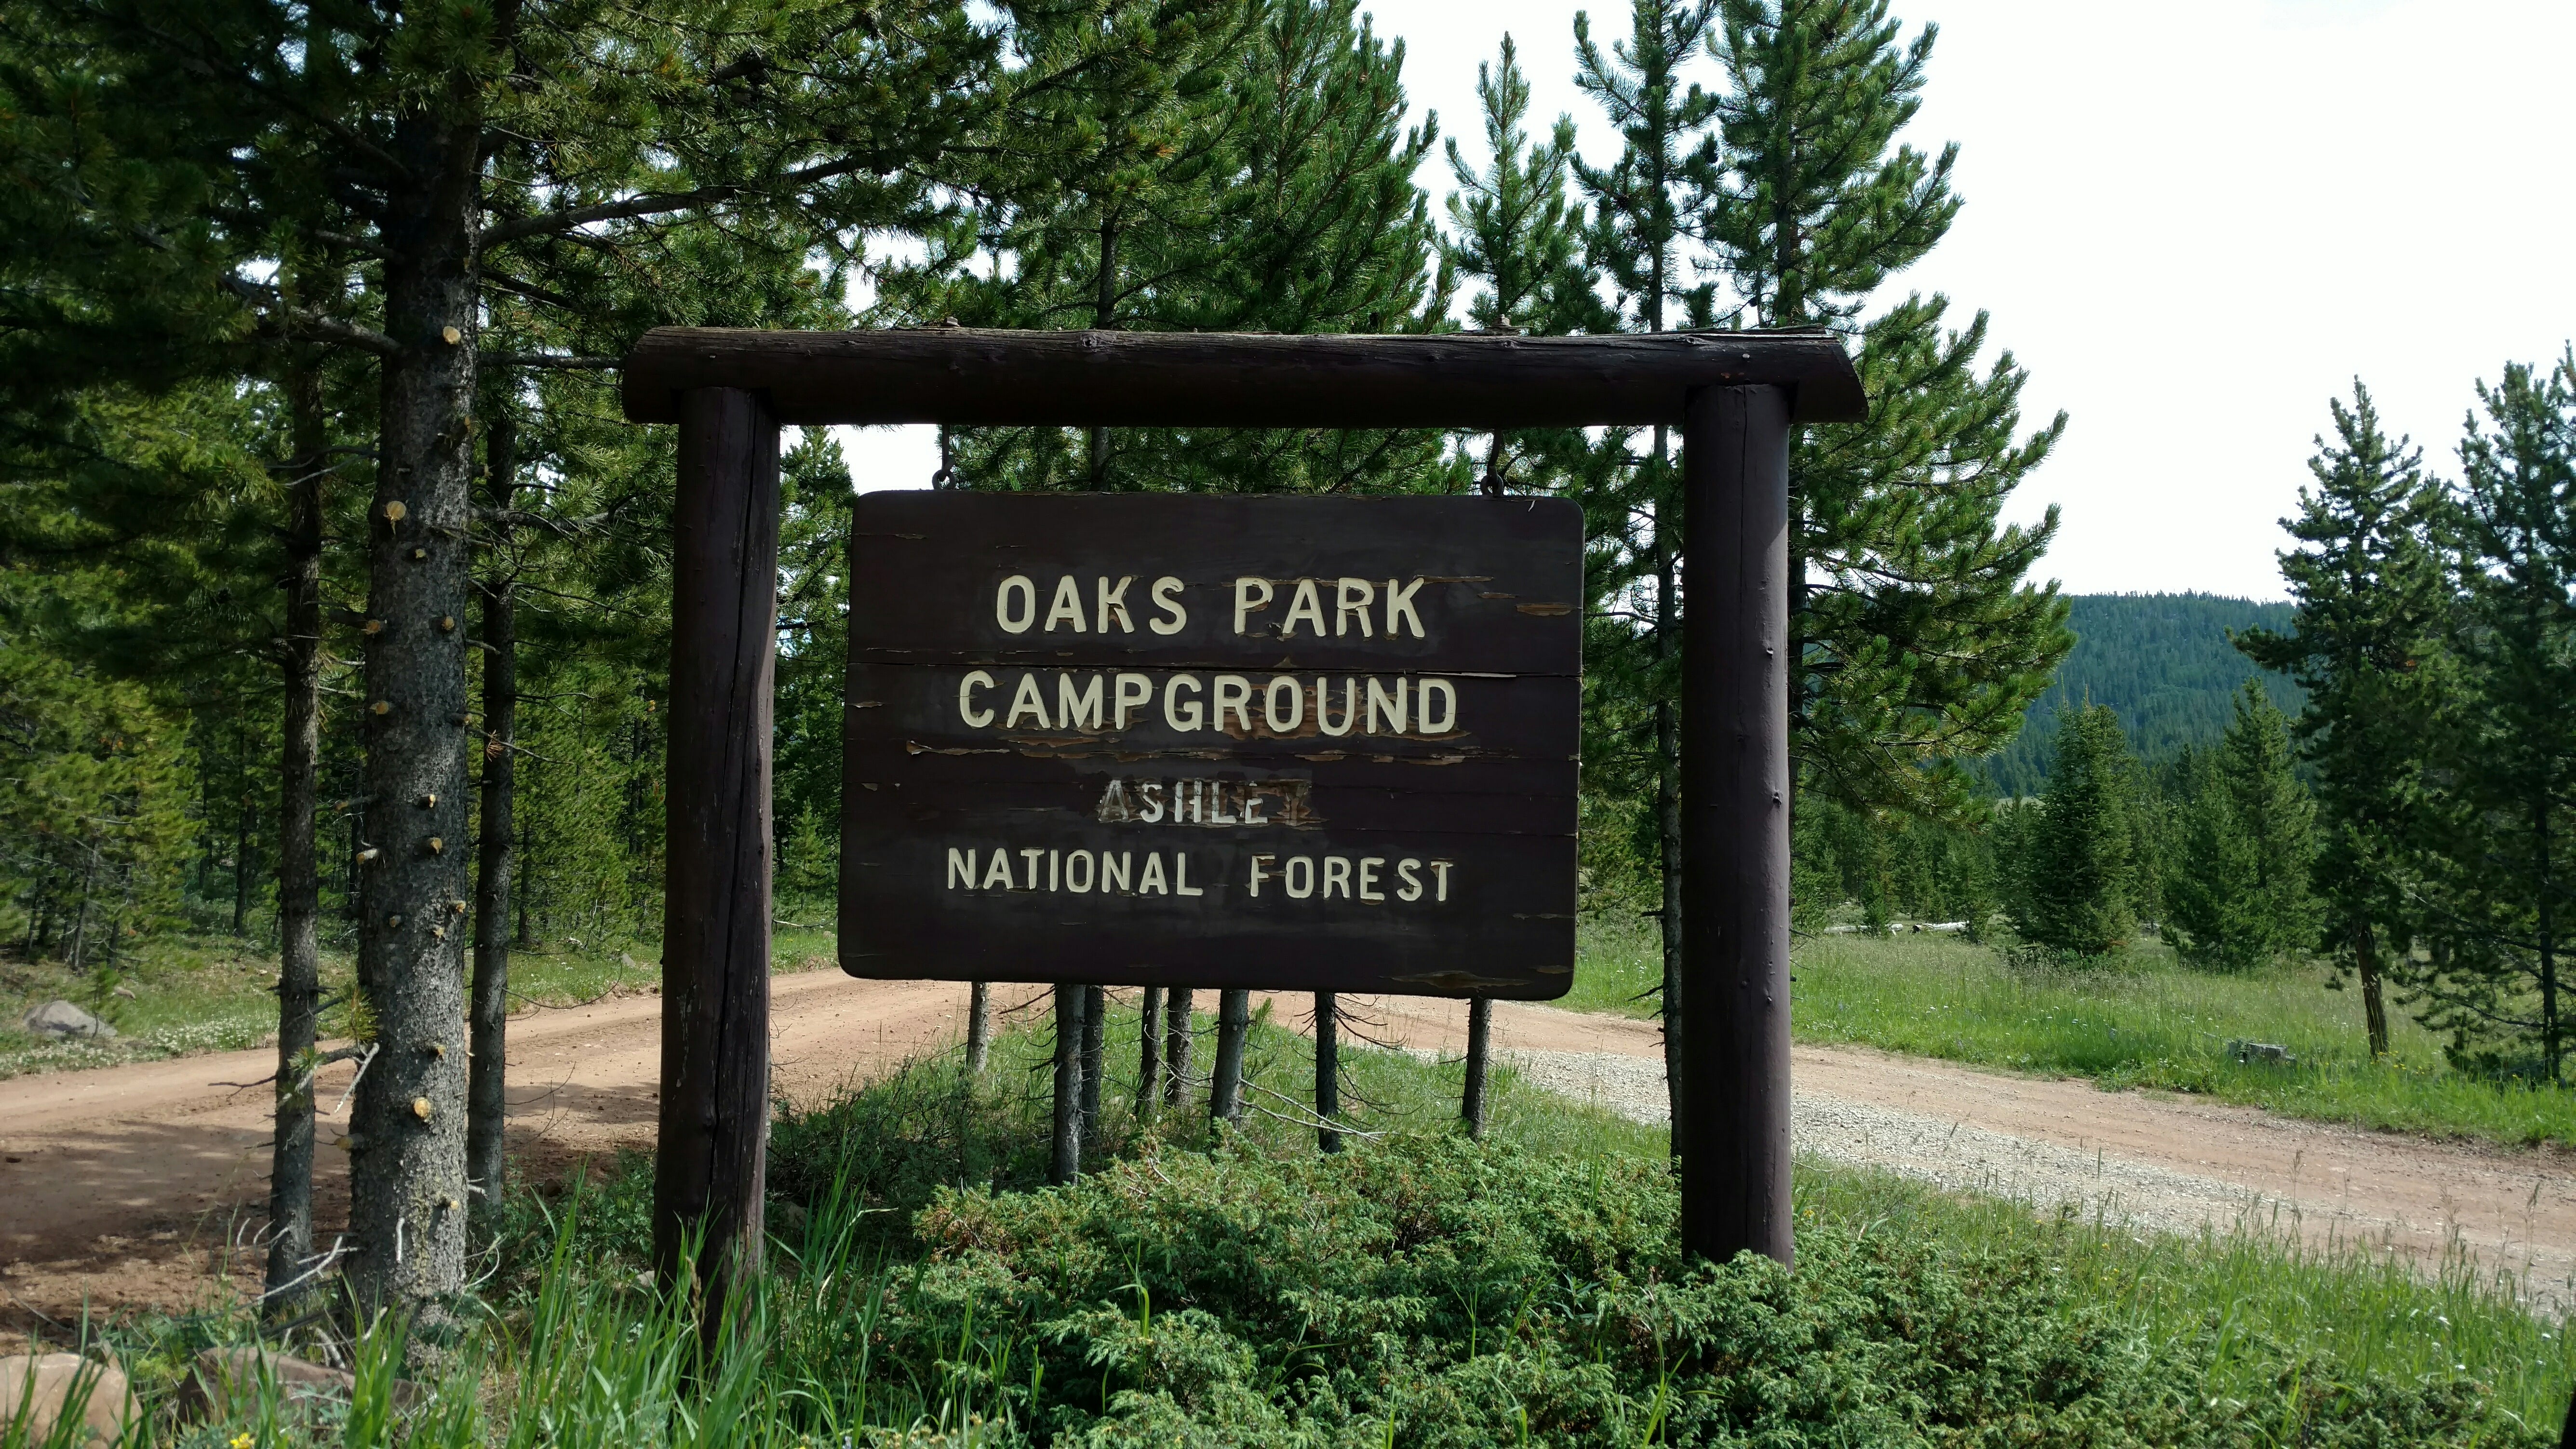 Camper submitted image from Oaks Park Campground - Ashley National Forest - 1